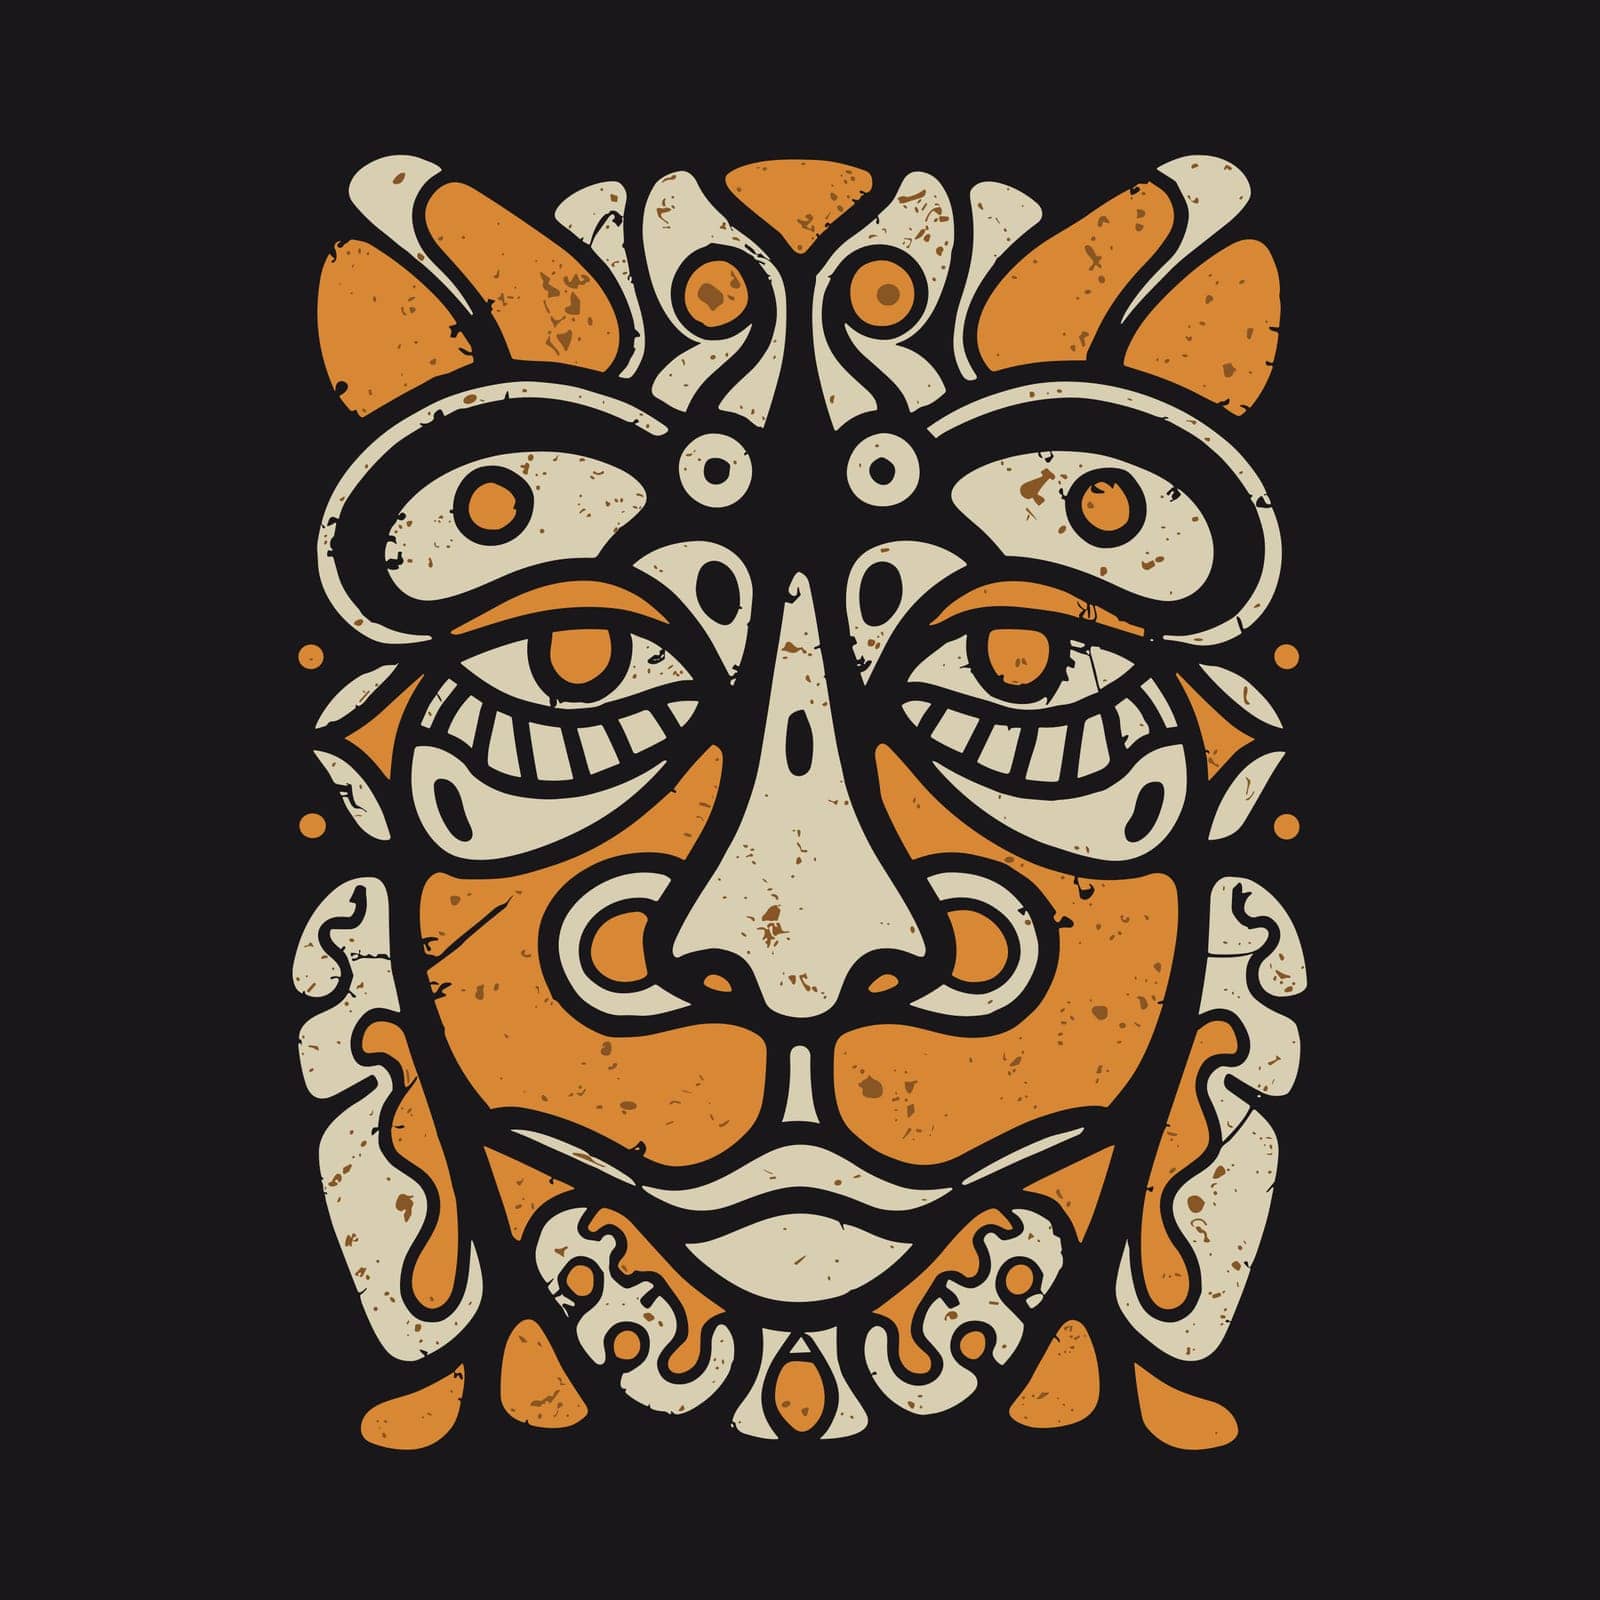 Tribal mask. Vector illustration for t-shirt. Isolated on black background. Abstract Art in Orange and White Colors, using a Negative Space